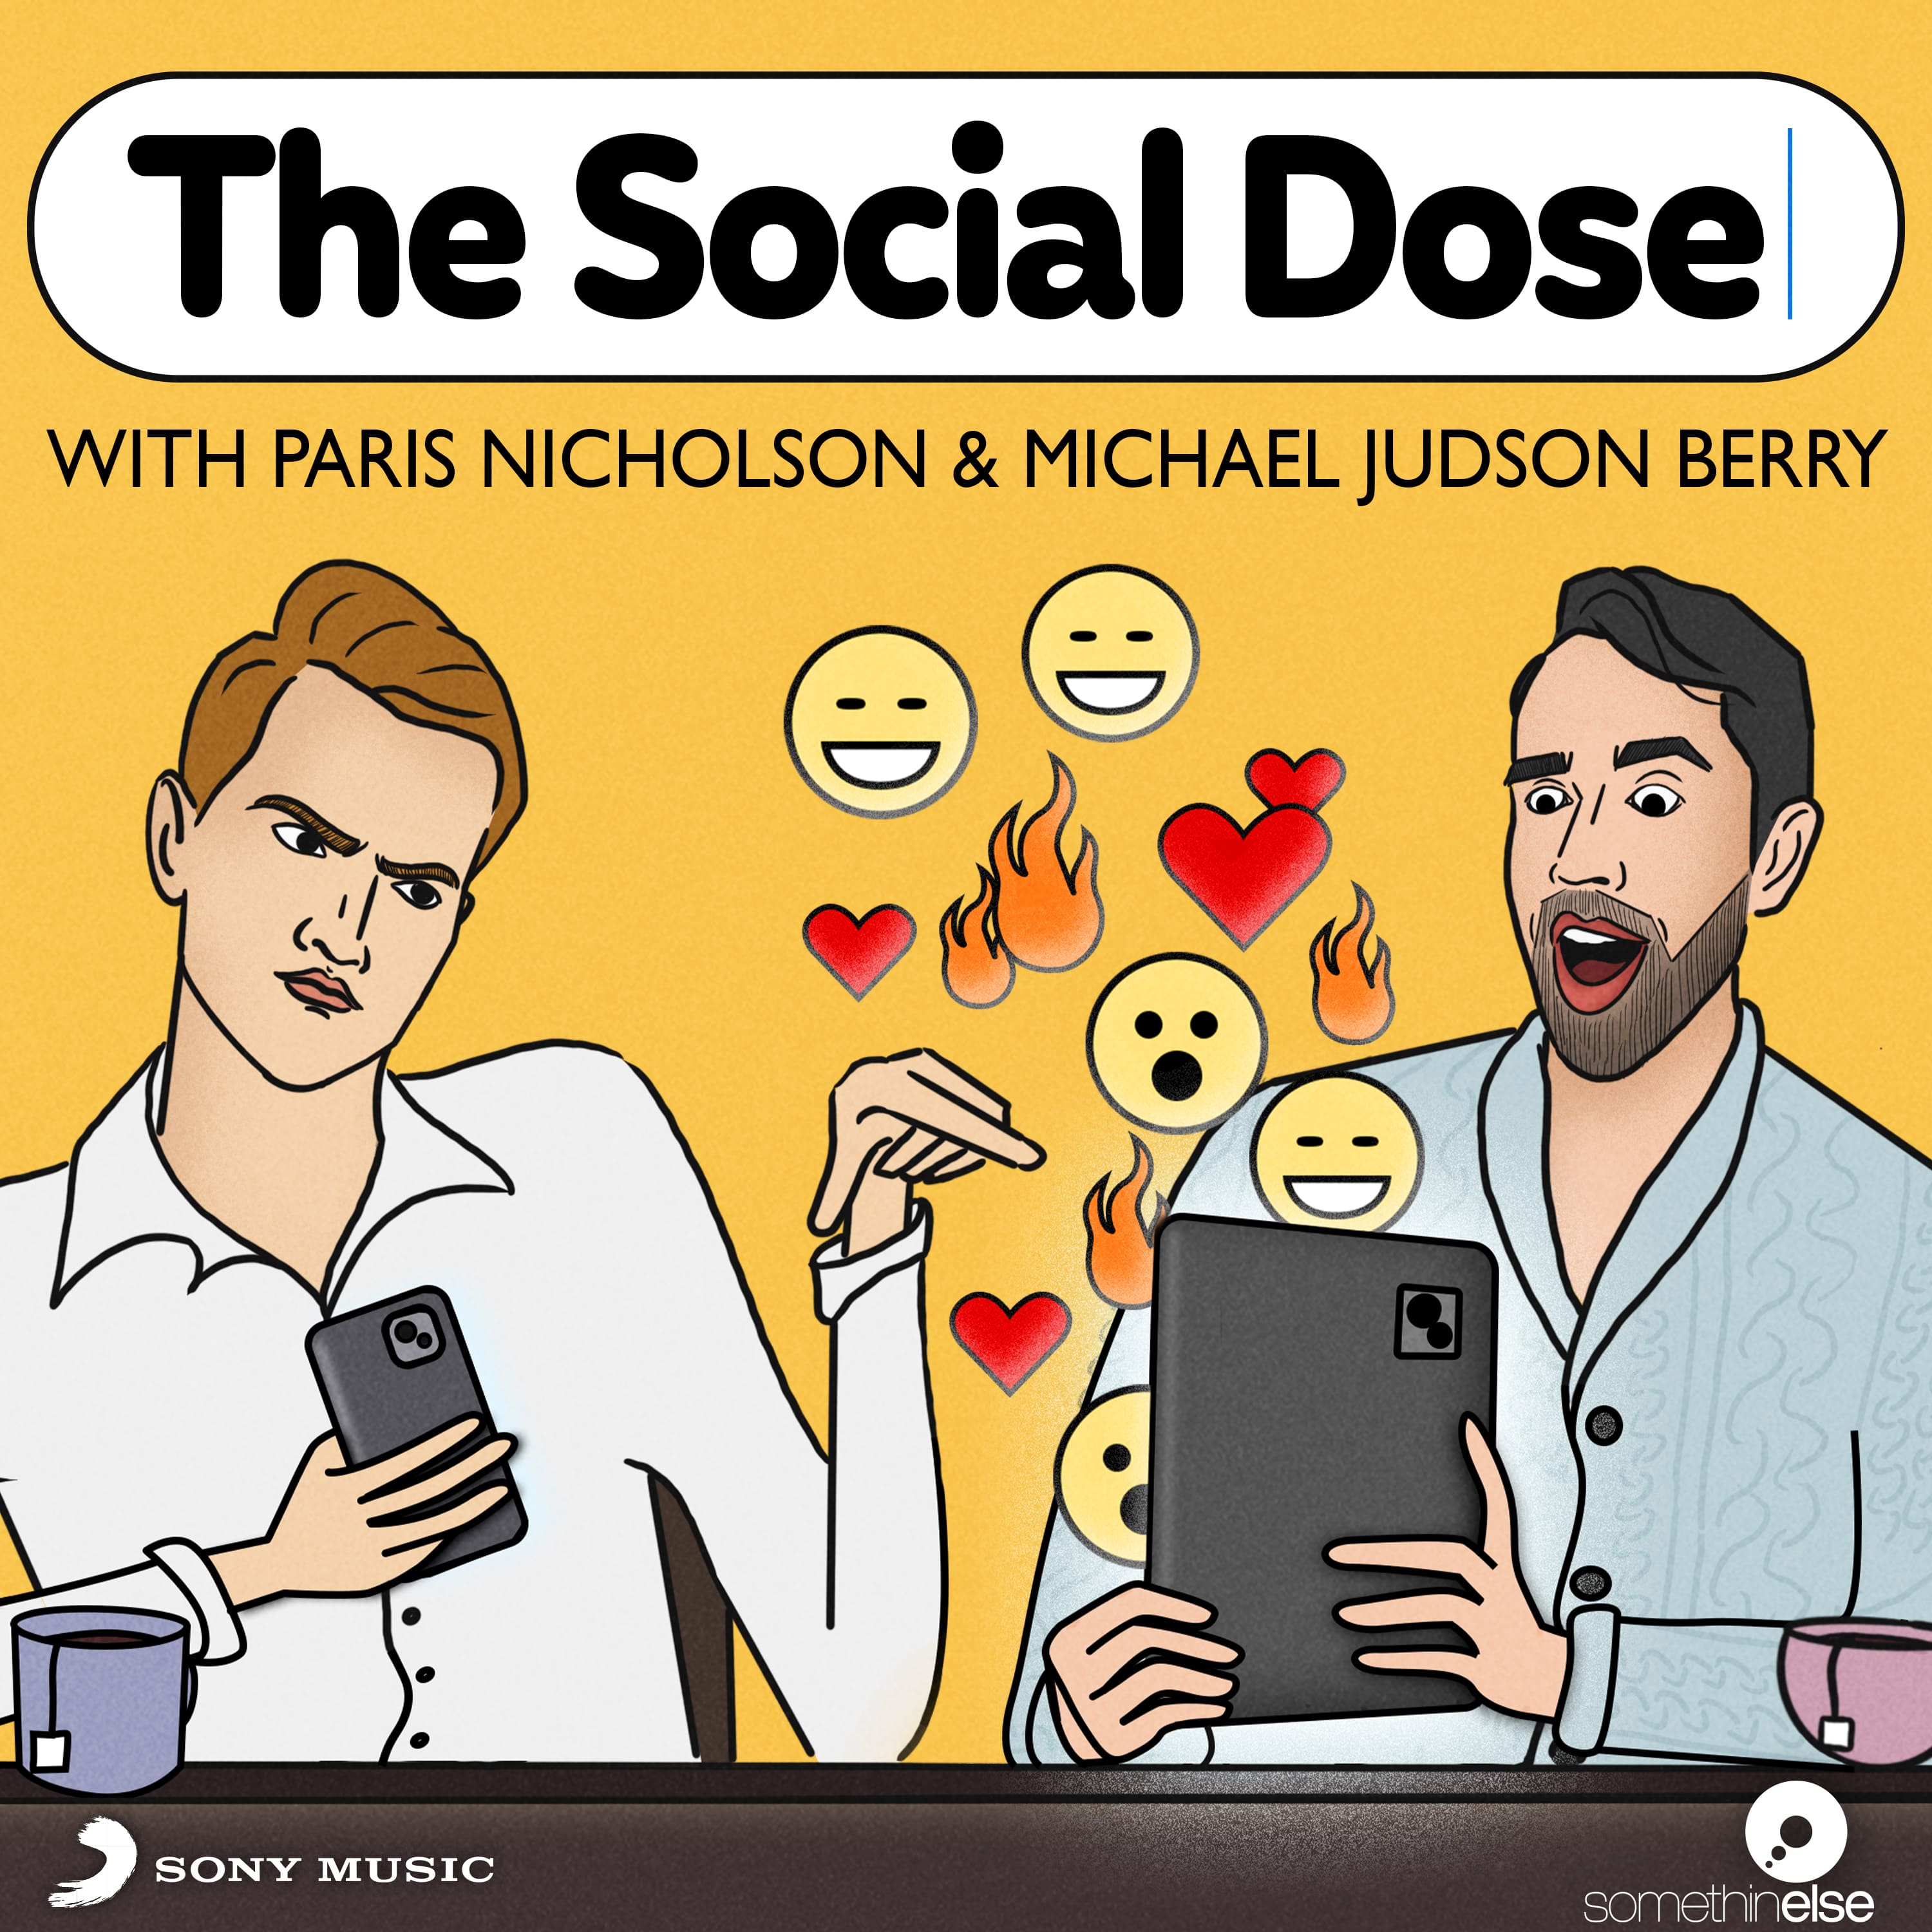 The social dose with Paris Nicholson and Michael Judson Berry Art